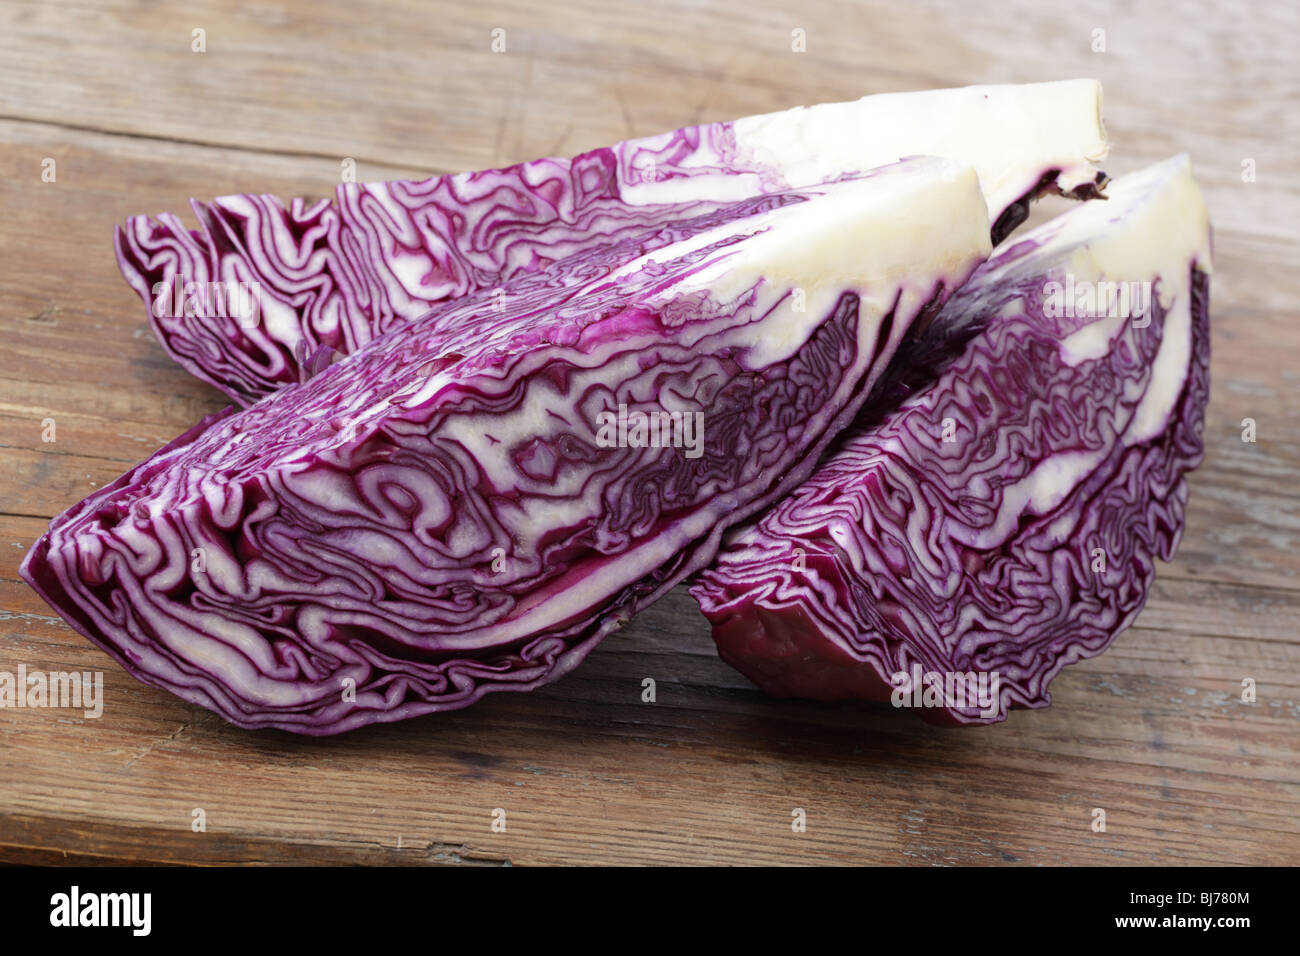 Sliced red cabbage on a wooden table Stock Photo